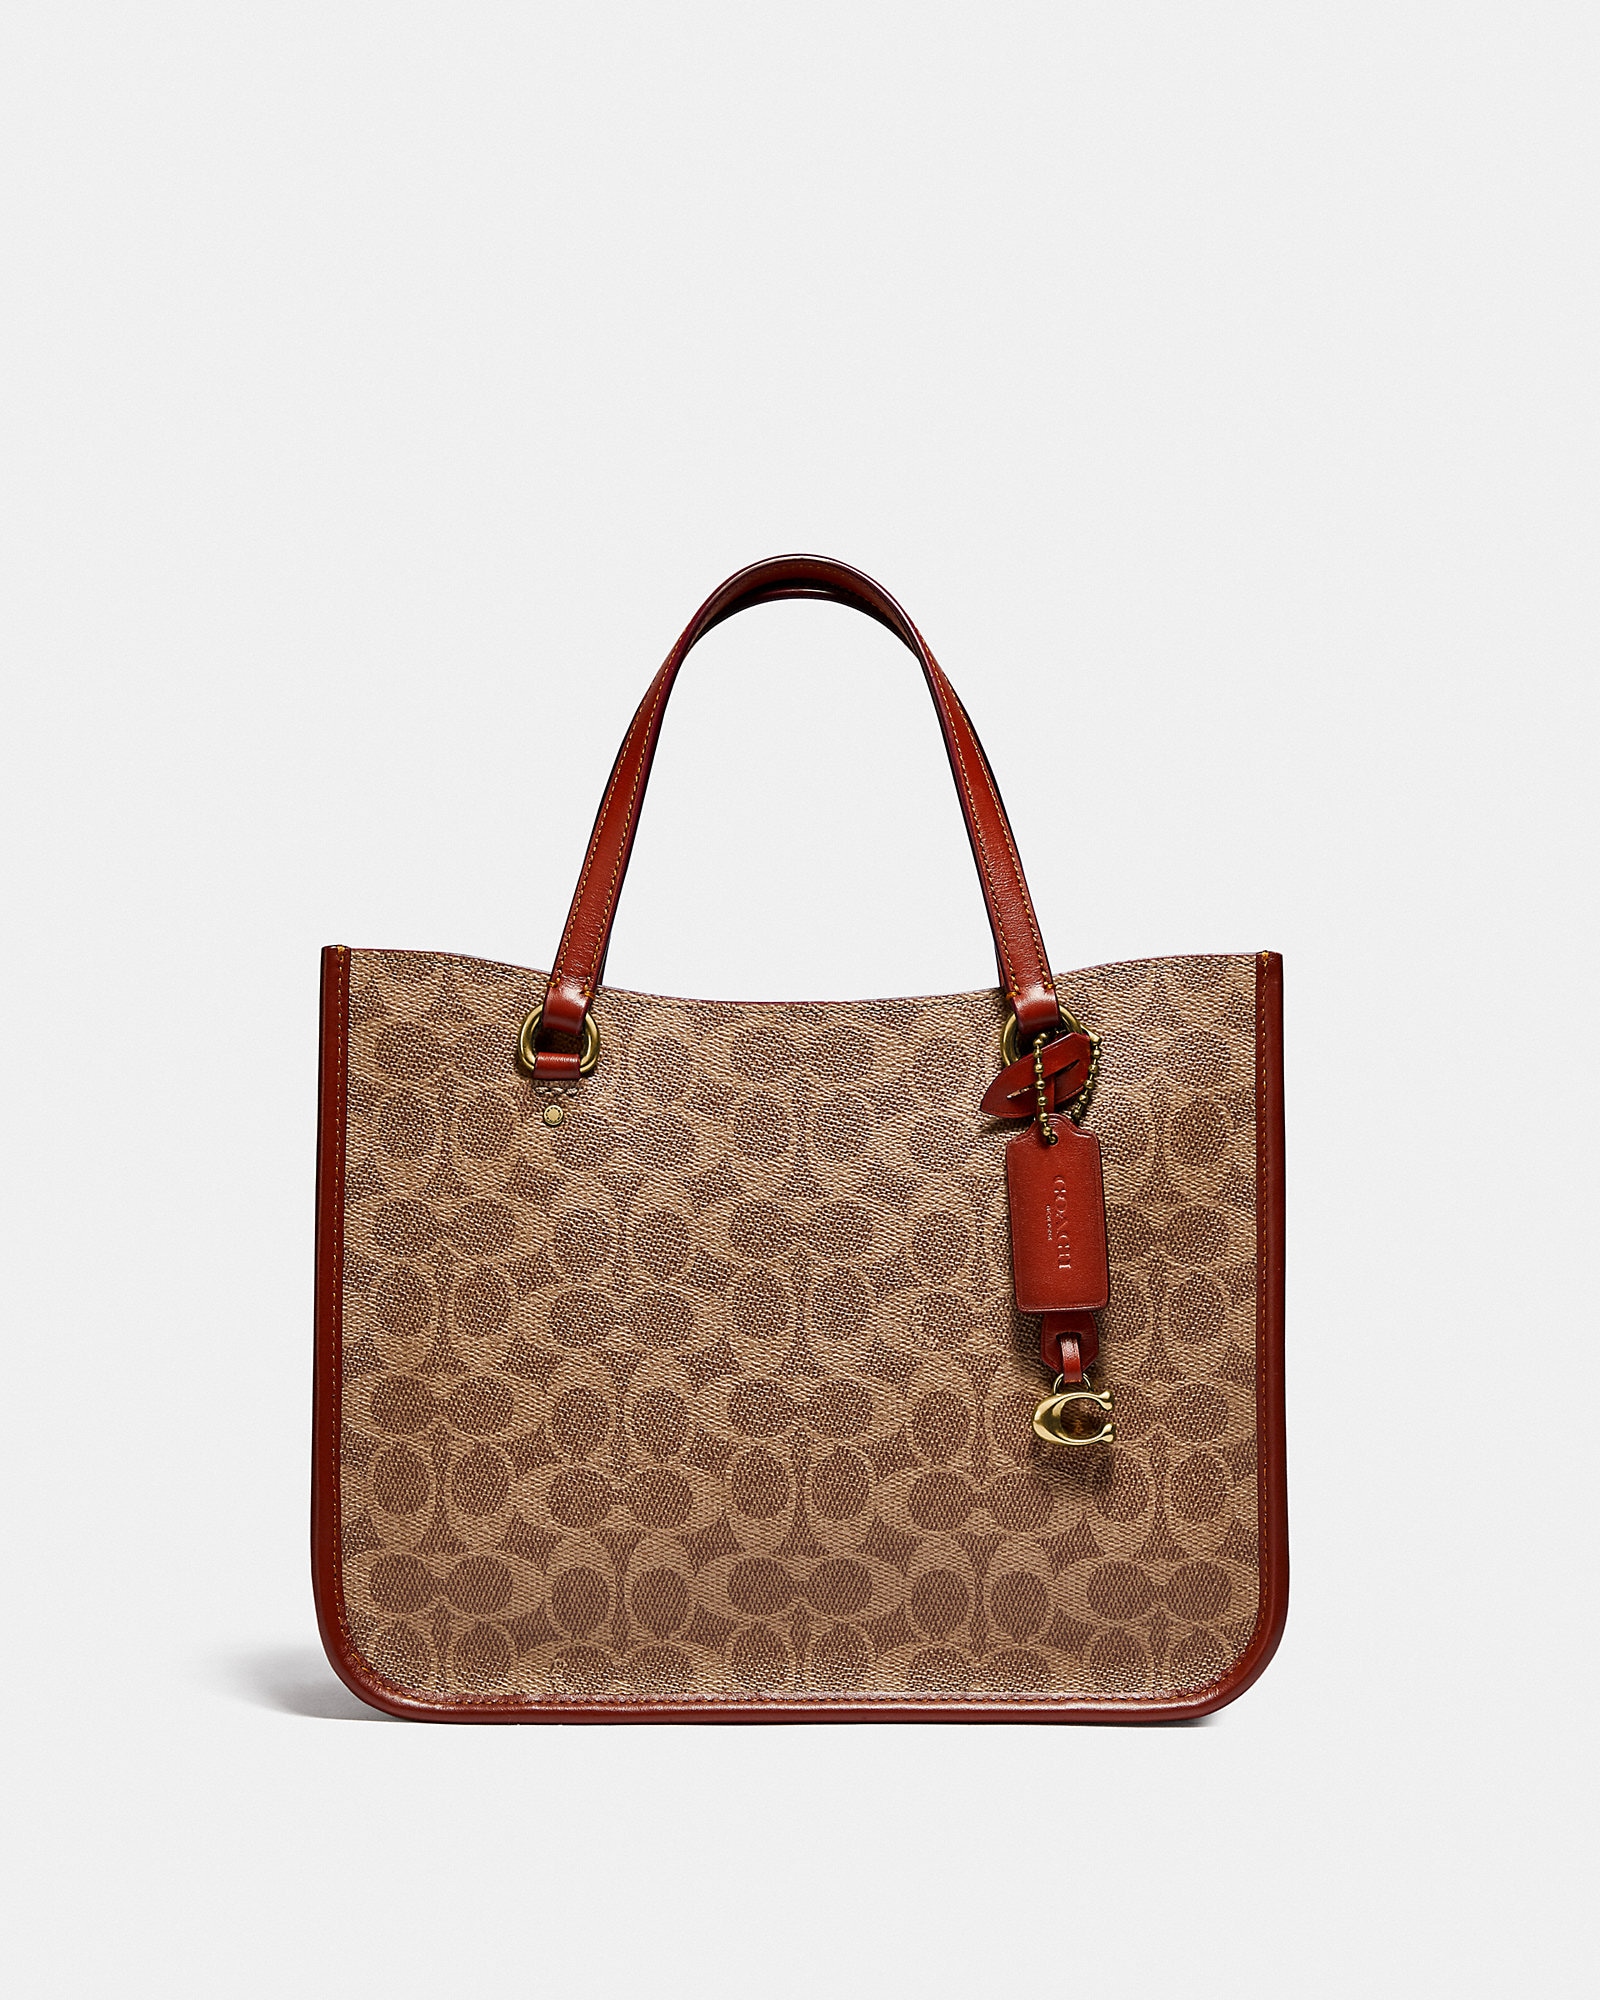 COACH TYLER CARRYALL IN SIGNATURE CANVAS - Bag Habits